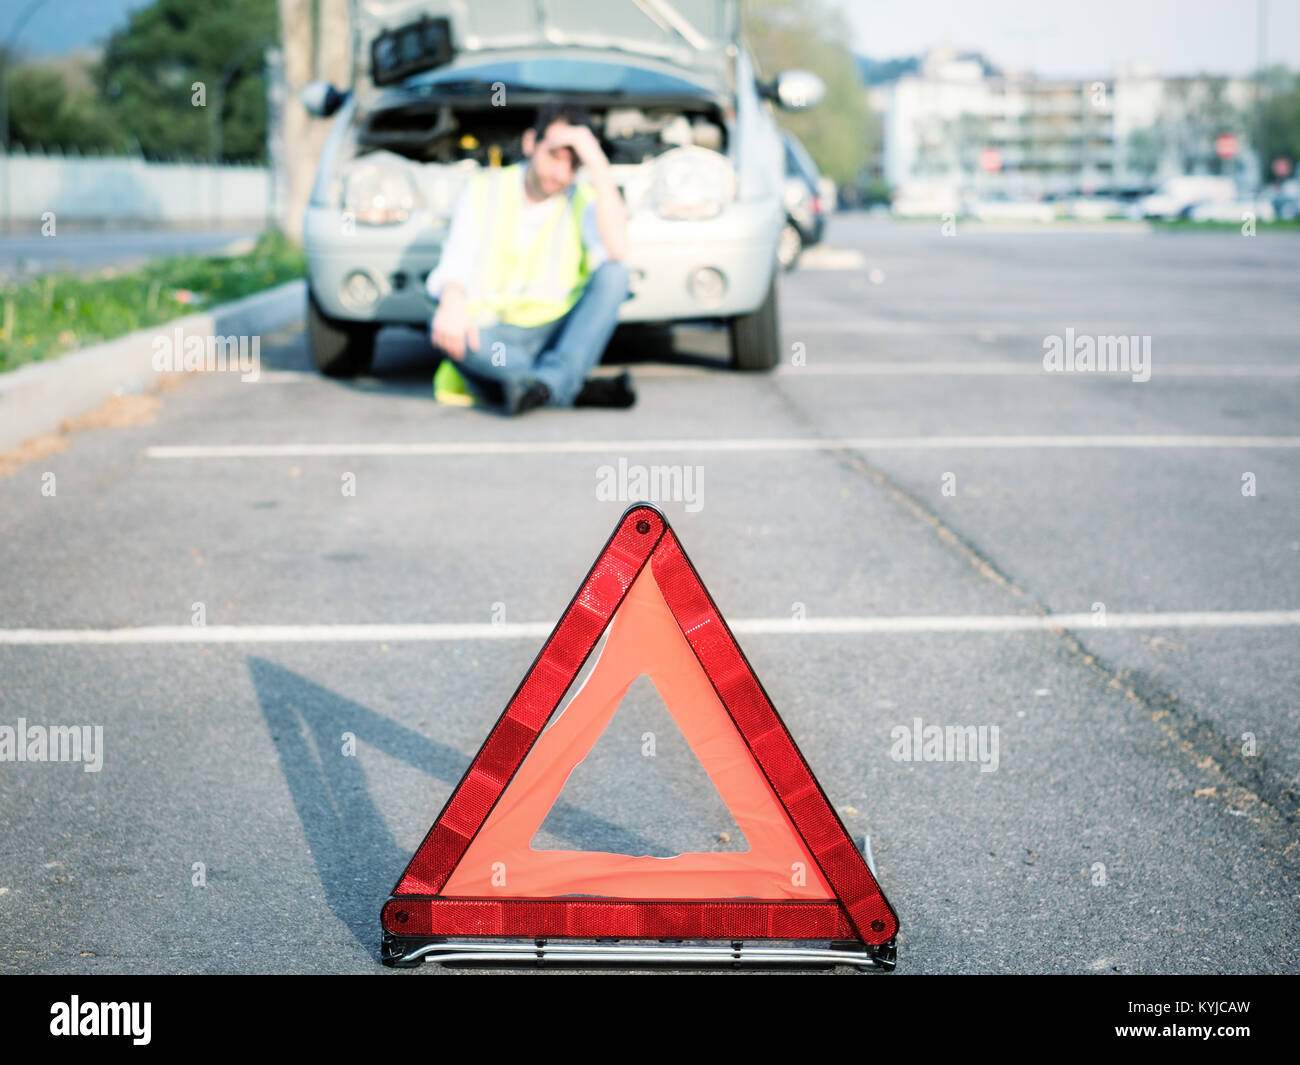 Sad man calling and waiting for mechanic service after vehicle breakdown Stock Photo